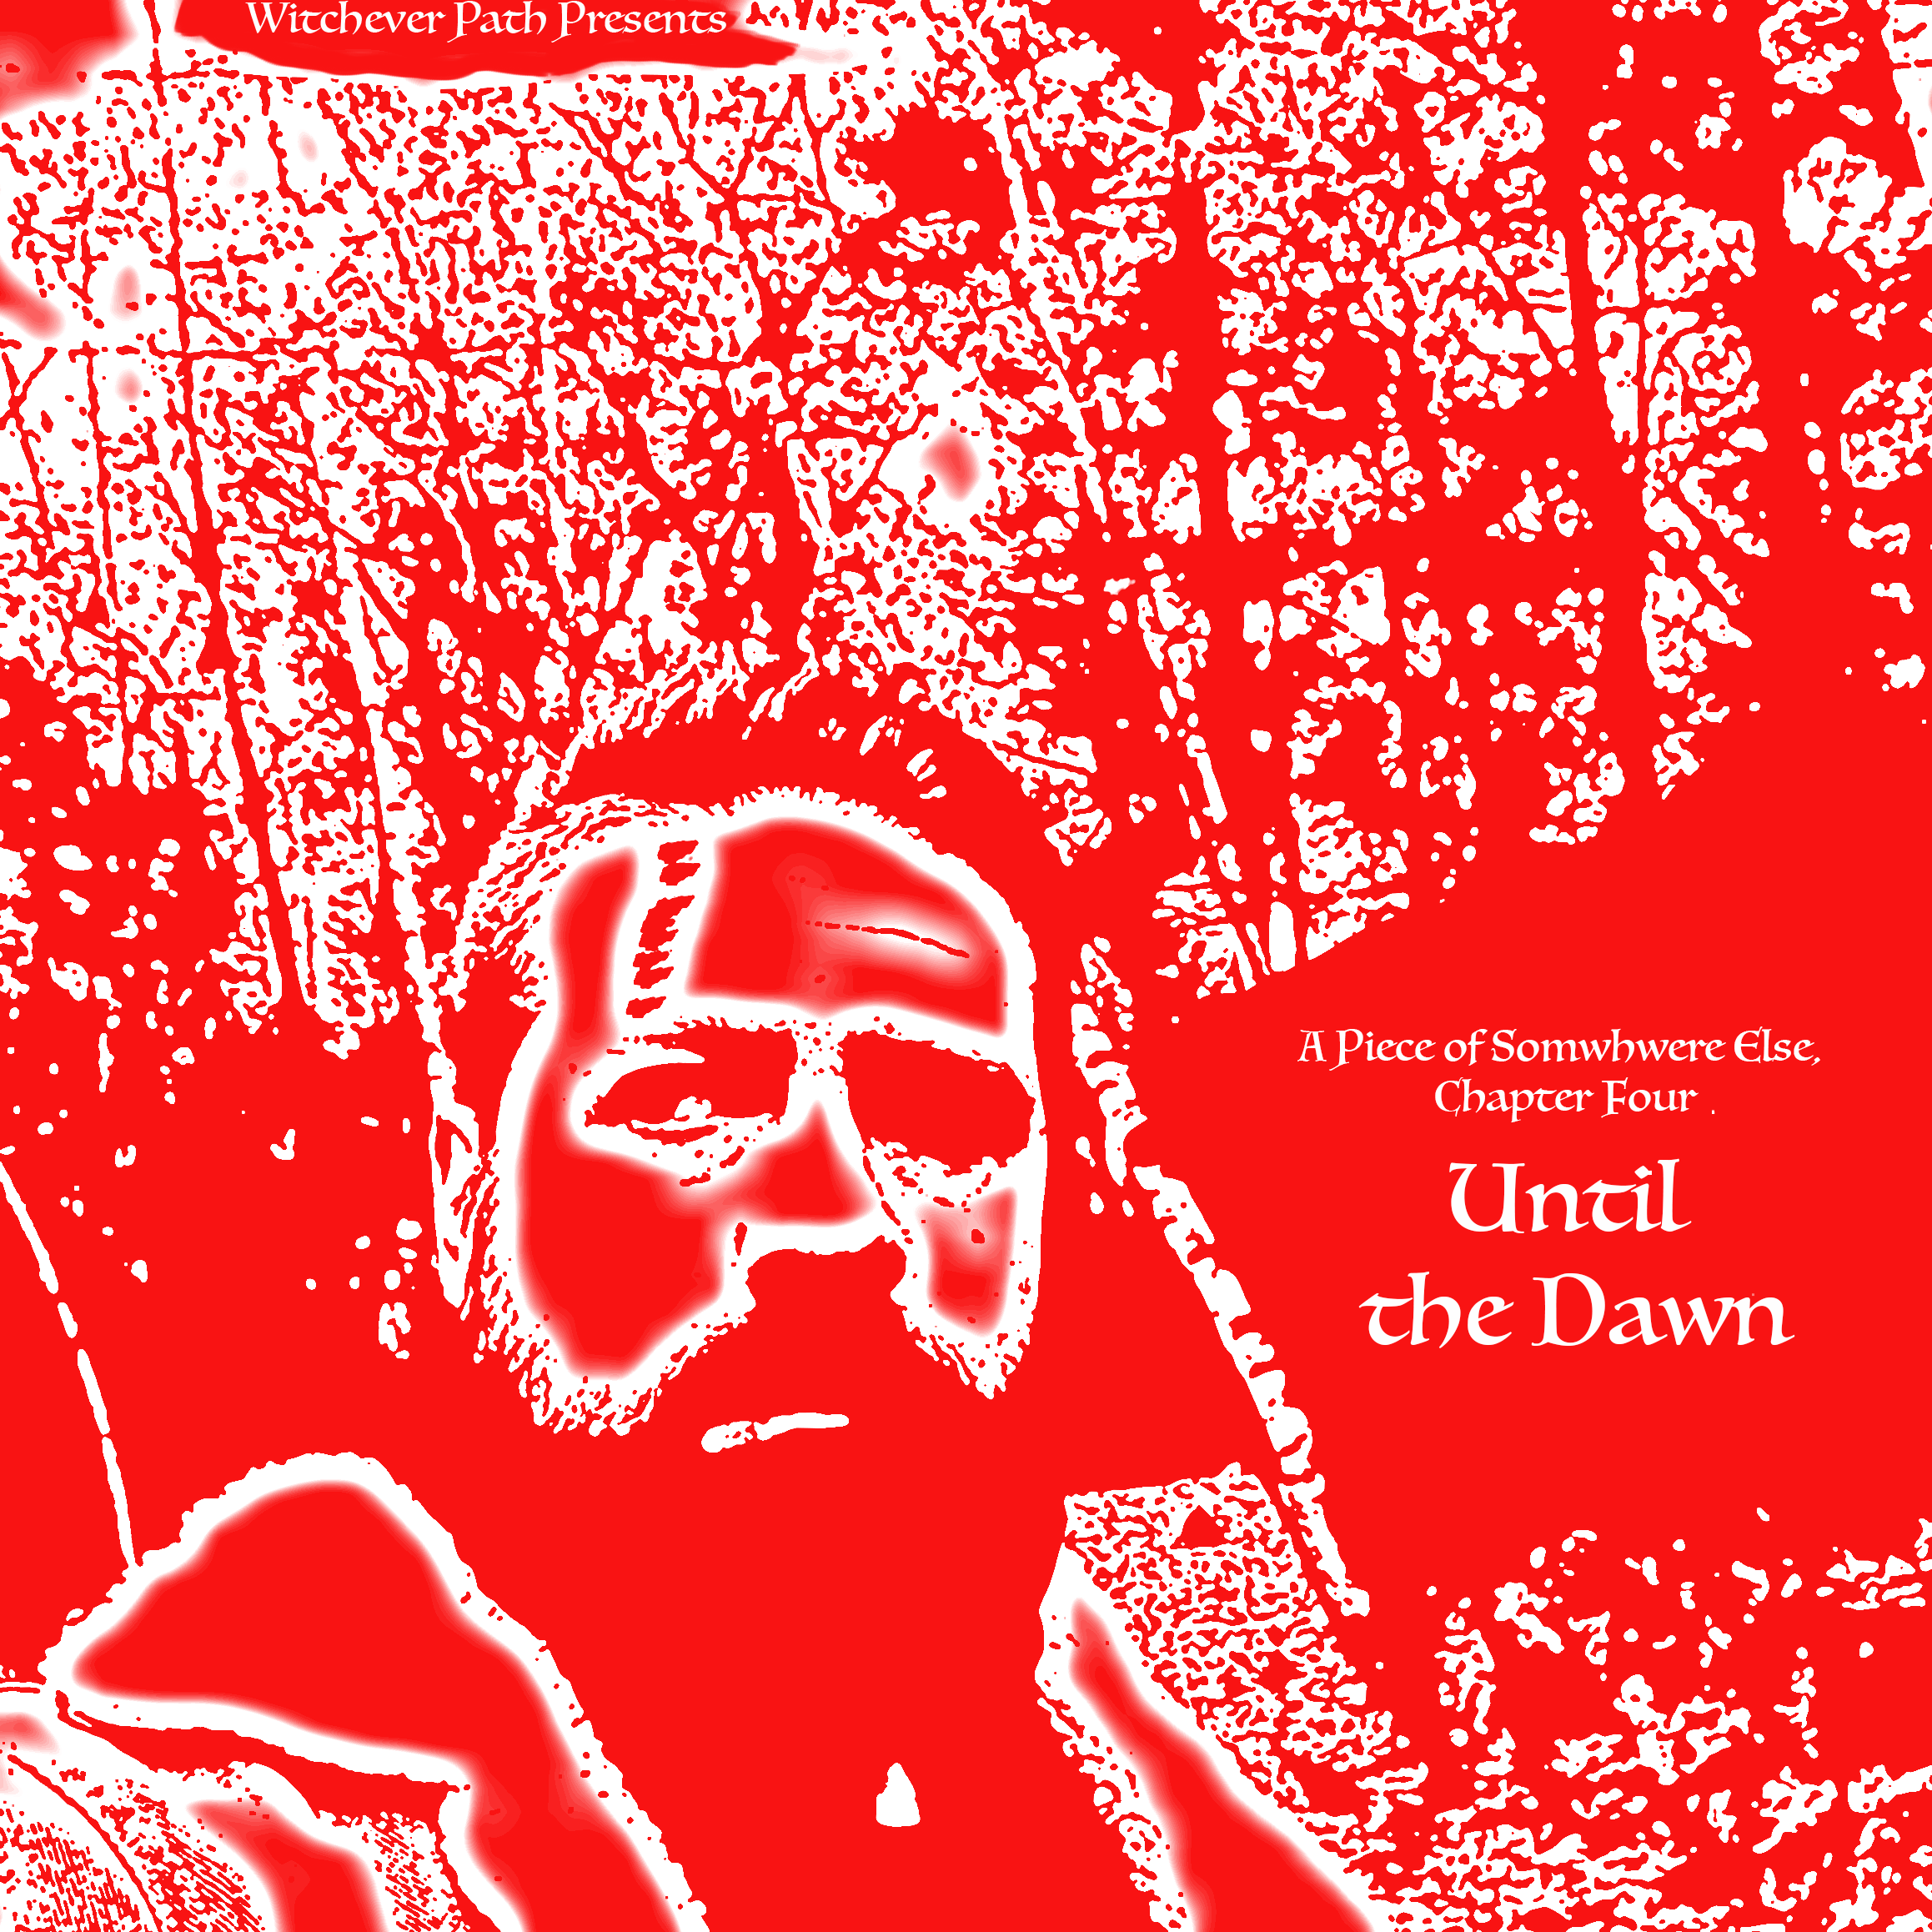 A red-and-white image of a middle-aged white guy in a forest. He has a long cut on his forehead, held together with butterfly sutures. The text next to him reads "A Piece of Somewhere Else, Chapter Four: Until the Dawn."